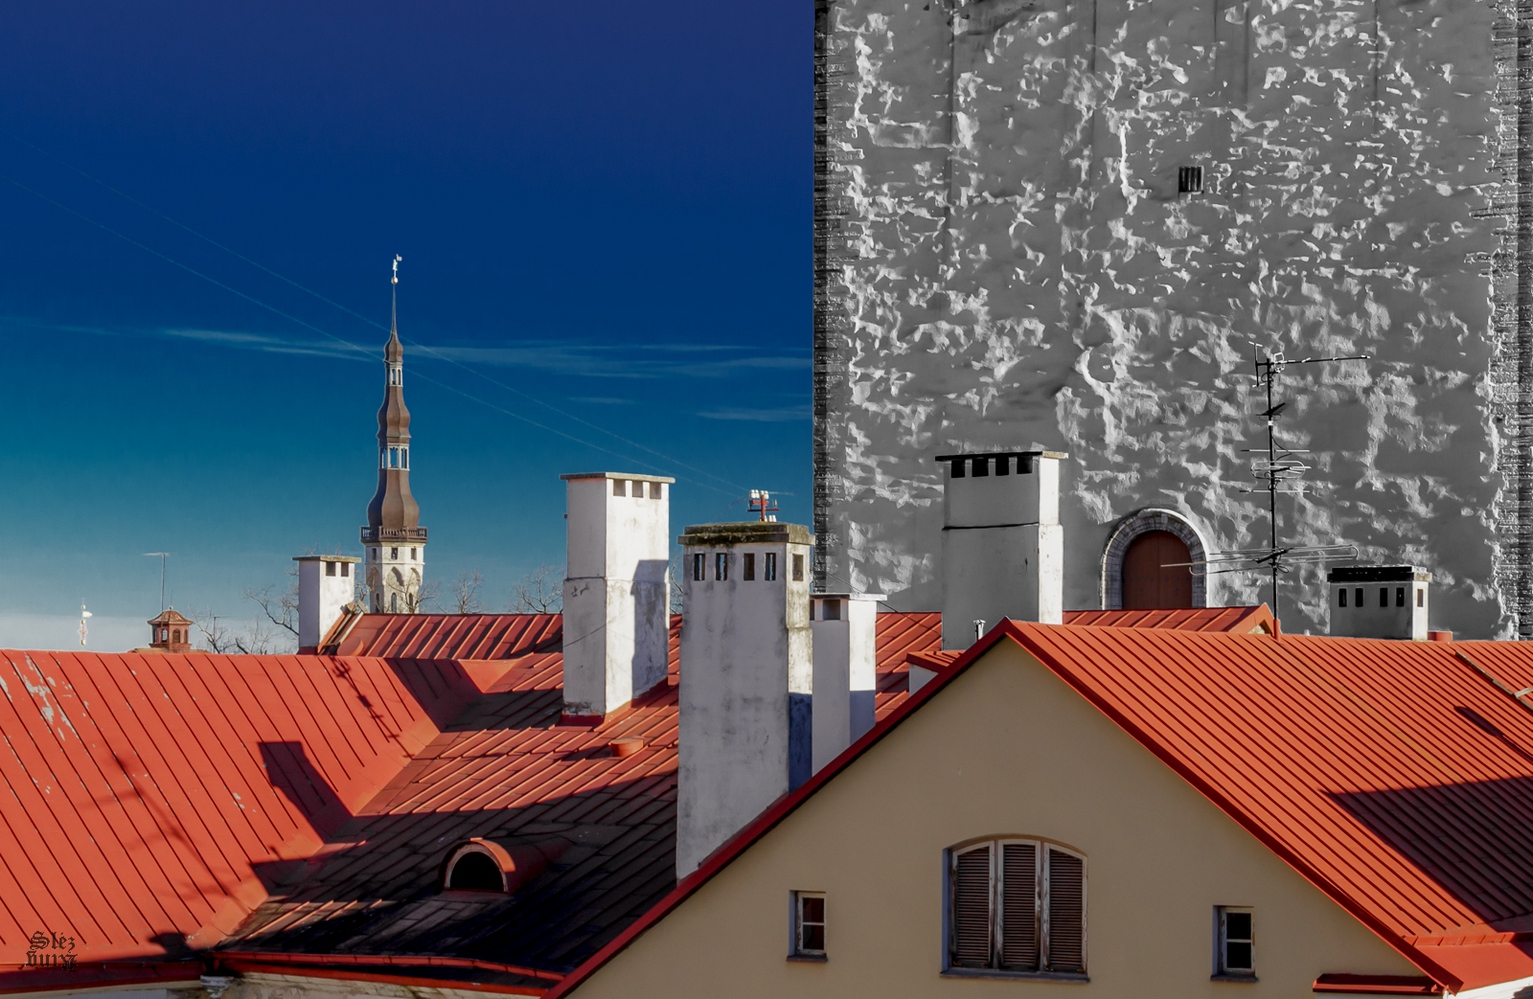 photo "Визуальная Геометрия" tags: architecture, panoramic, fragment, Church, Estonia, Europe, February, Old Town, Rigor, Tallinn, ancient, angle, architecture, blue, buildings, cathedral, chimney, cityscape, colors, contrast, cultures, dark blue, descriptive, domination, exterior, facade, famous, front, gable, geometry, gothic, history, house, light, medieval, morning, outdoors, polarization, red, restore, roof, shade, shadow, sky, spire, spring, sun, sunlight, tourists, tower, travel, wall, white